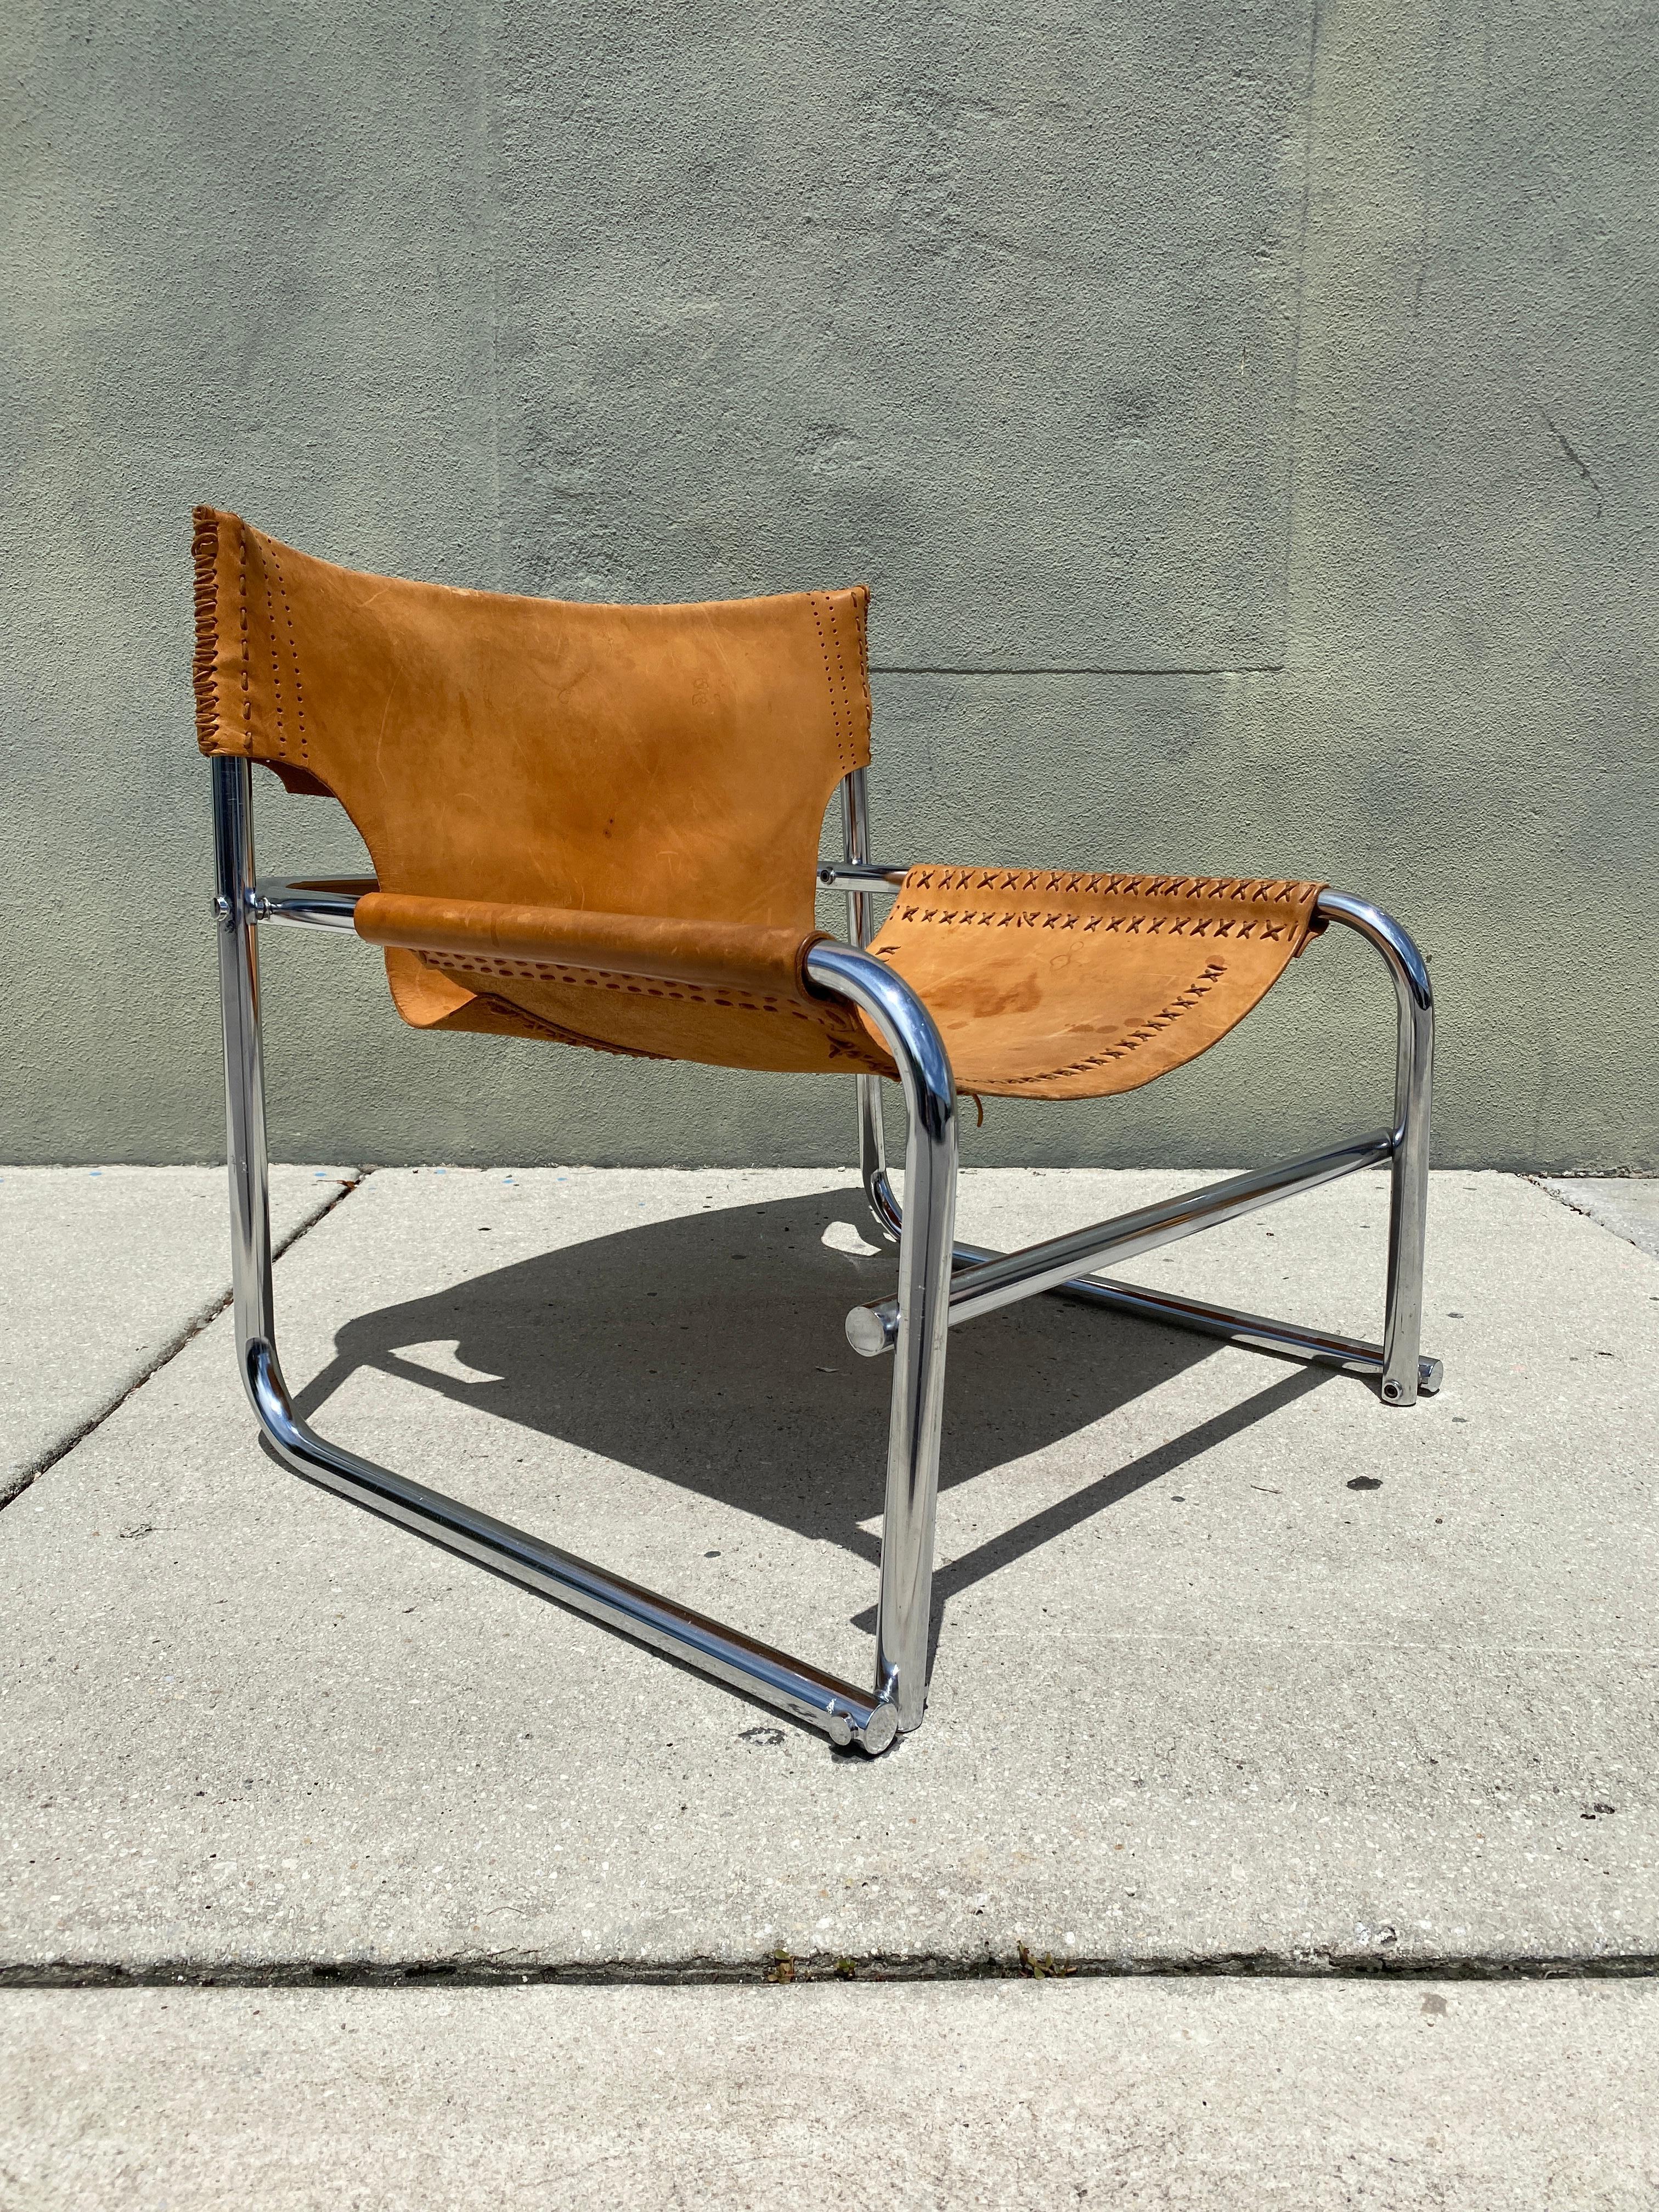 Vintage Armchair in Tubular steel and leather designed by Rodney Kinsman in the UK, 1960s for his company OMK . Clean sturdy and sound, brown leather has no rips or tears, only some marks that add aging character to the piece.

Measures: 31.5” W x